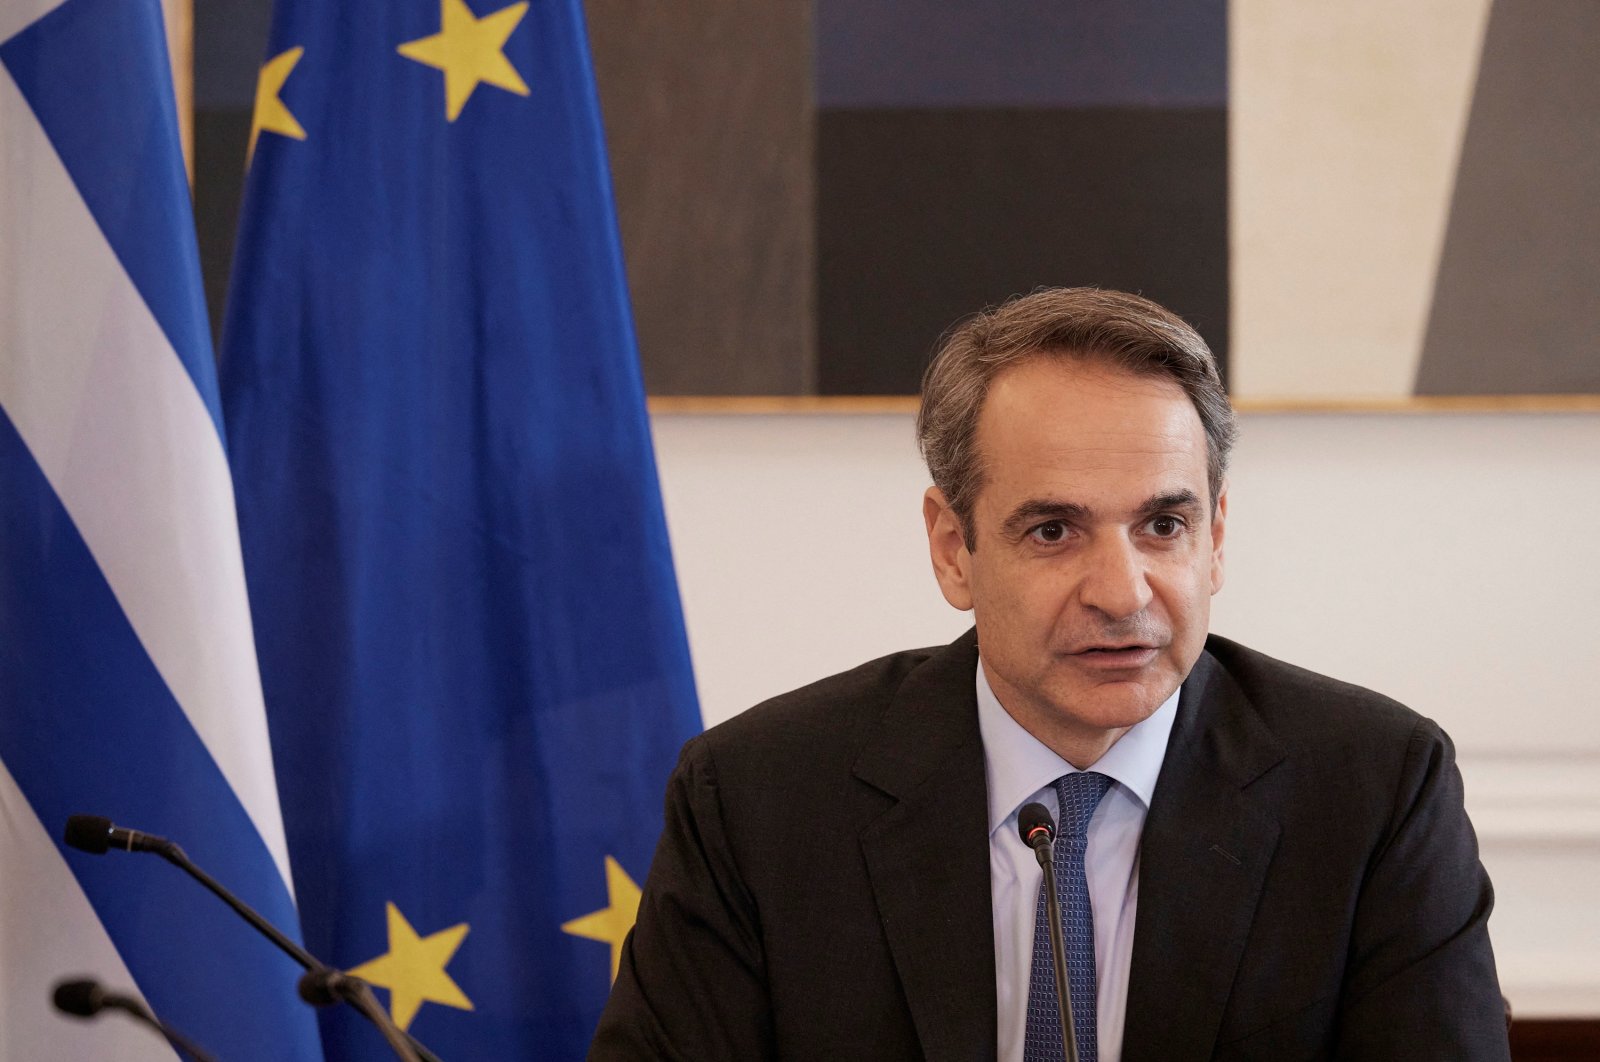 Greek Prime Minister Kyriakos Mitsotakis leads a Cabinet meeting at the Maximos Mansion in Athens, Greece, March 28, 2023. (Reuters Photo)